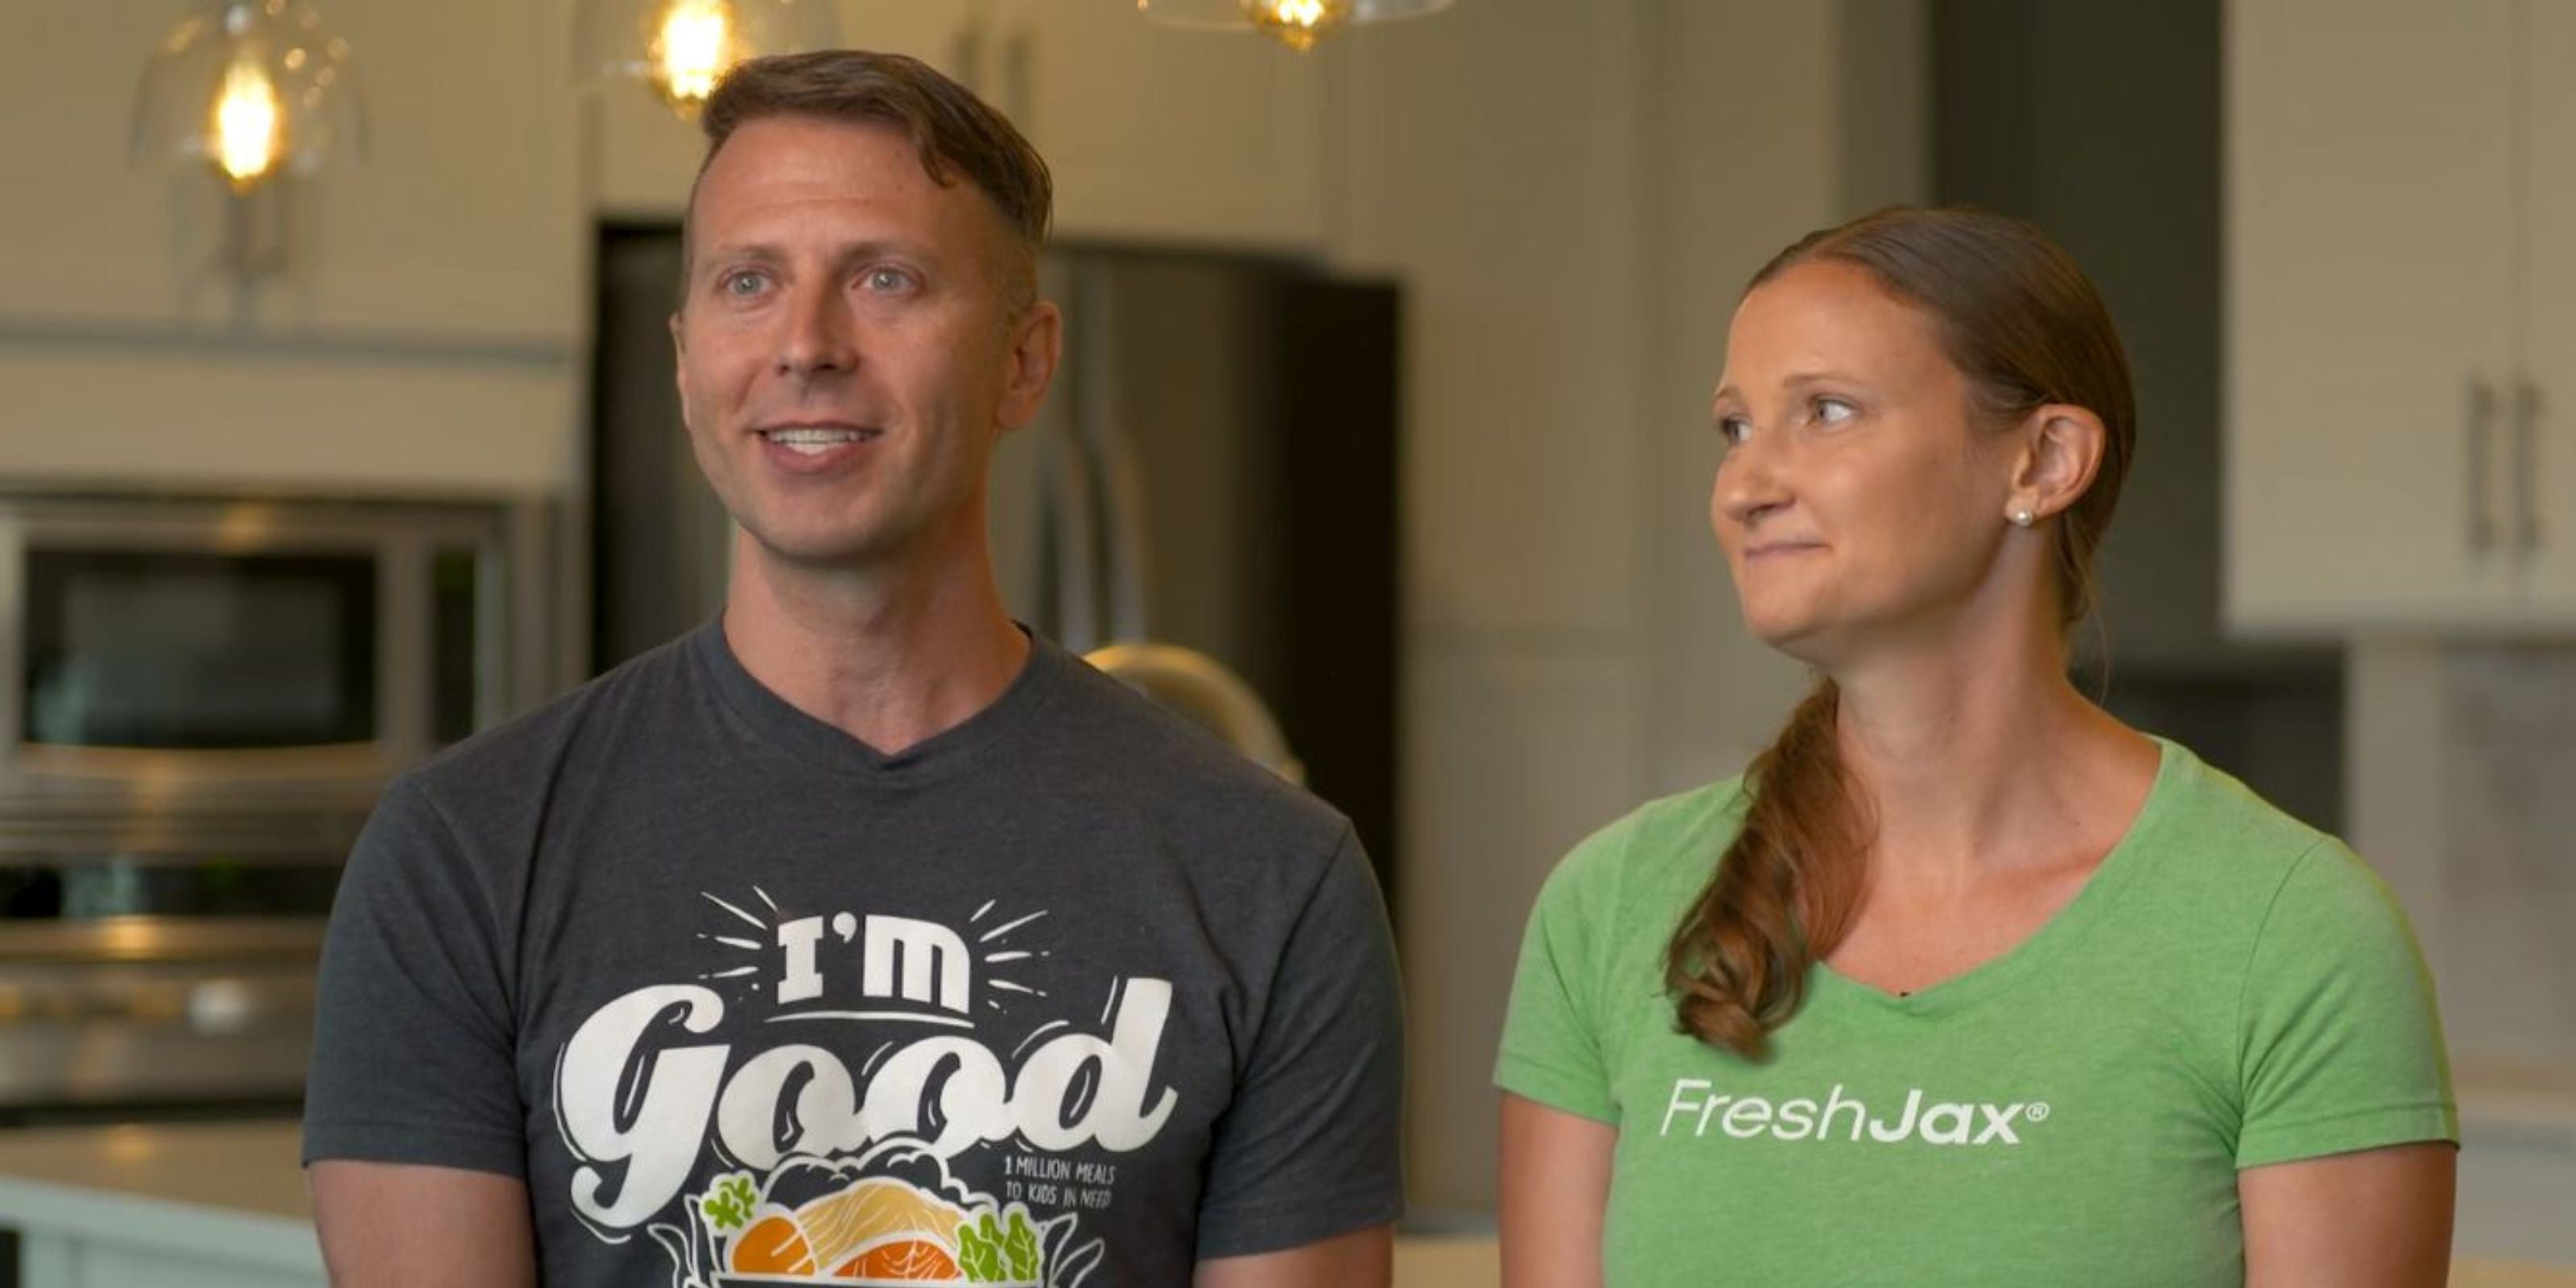 Our Founders, Hillary and Jason, Discuss the History and Mission of FreshJax